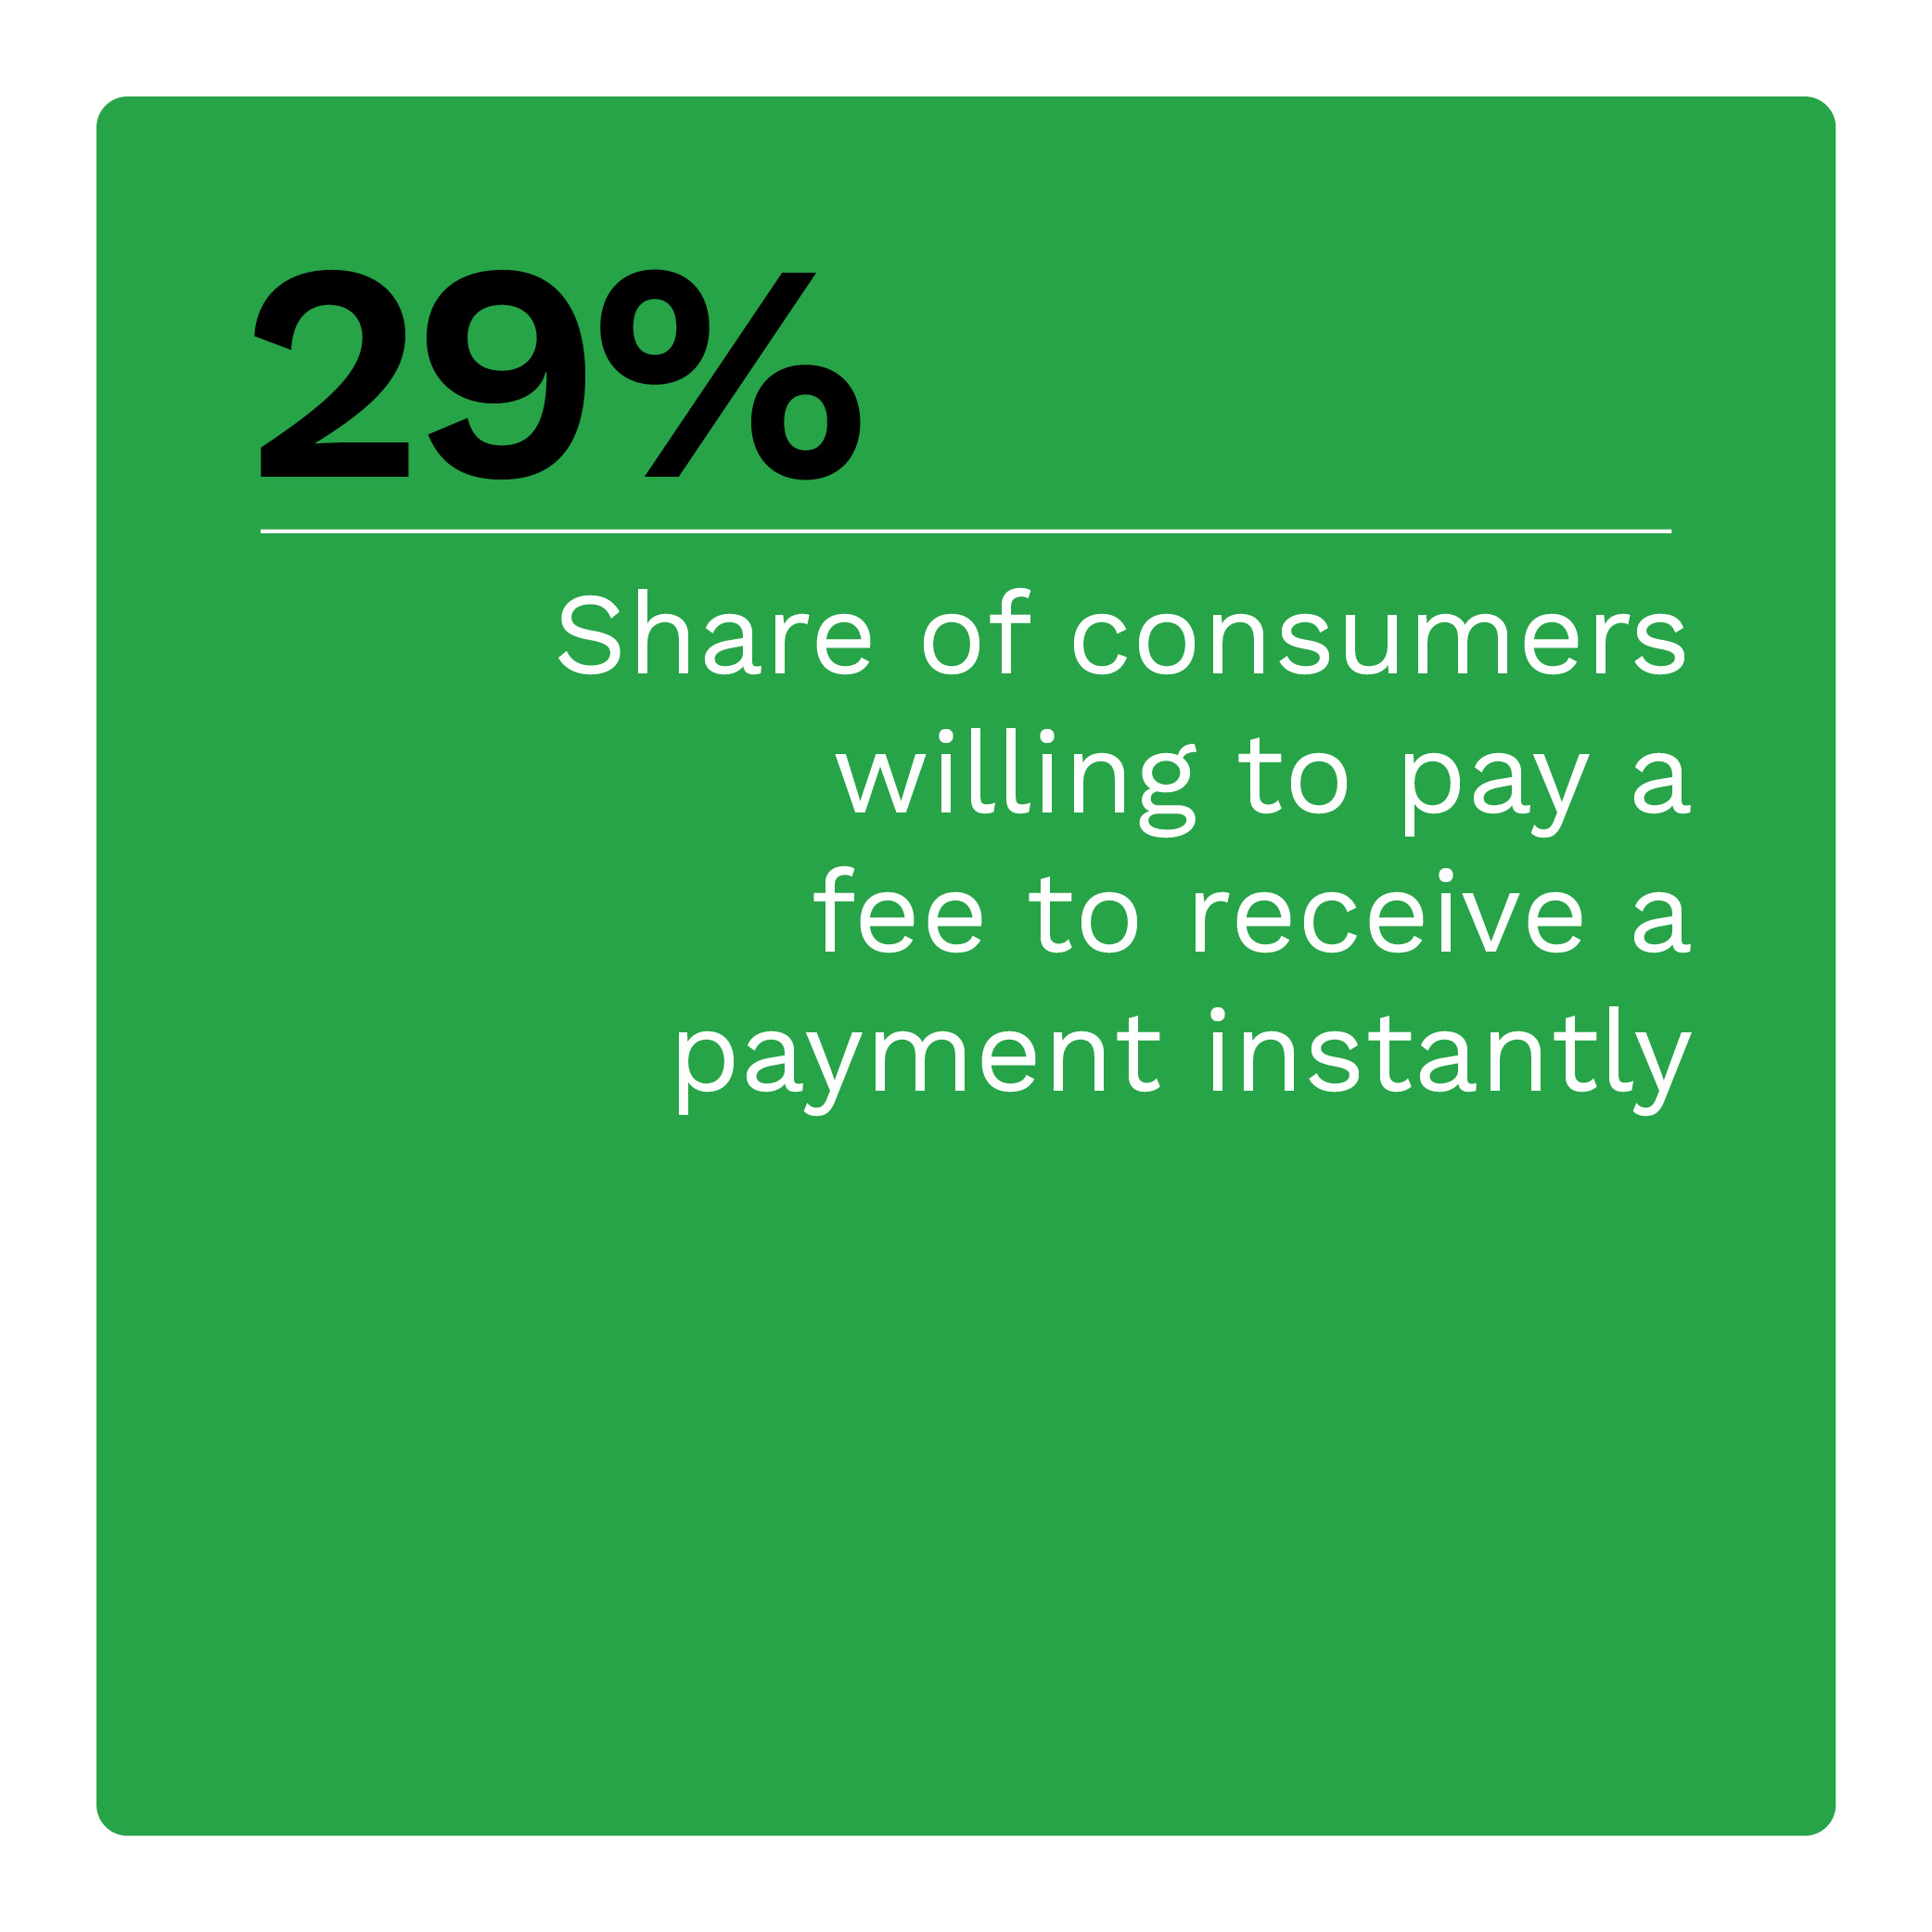  Share of consumers willing to pay a fee to receive a payment instantly